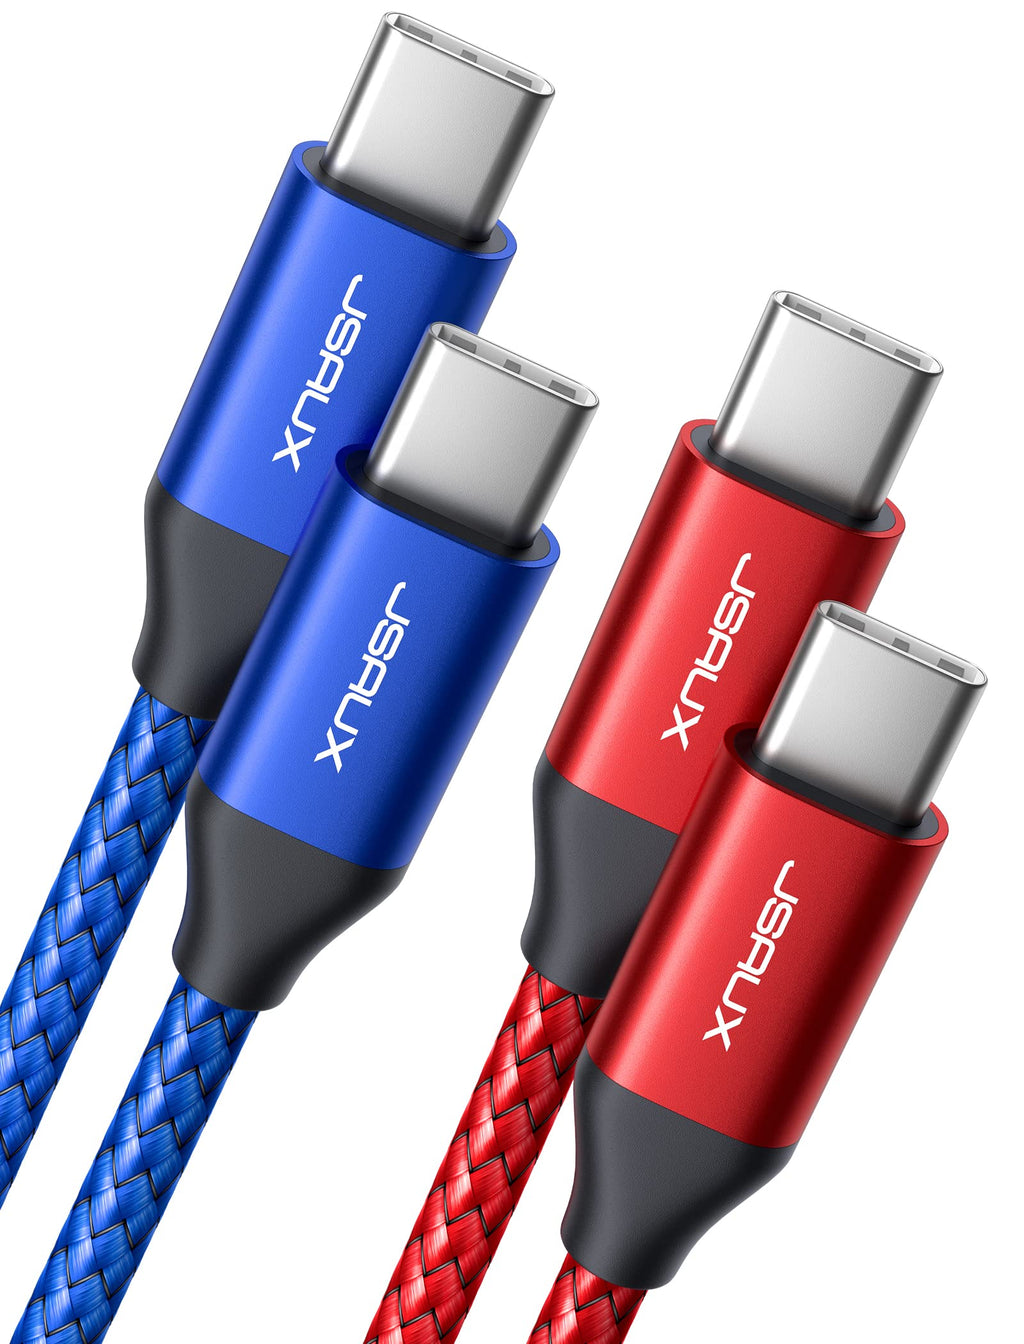  [AUSTRALIA] - USB C to USB C 60W Cable, JSAUX[2-Pack 6.6ft] USB Type C Charger Cord Compatible with Samsung Galaxy S20+ Note 20 Ultra Note 10+, MacBook Air/Pro 13'', iPad Pro 2020/2018, Pixel 2/3/4-Blue&Red 6.6ft+6.6ft Blue&Red